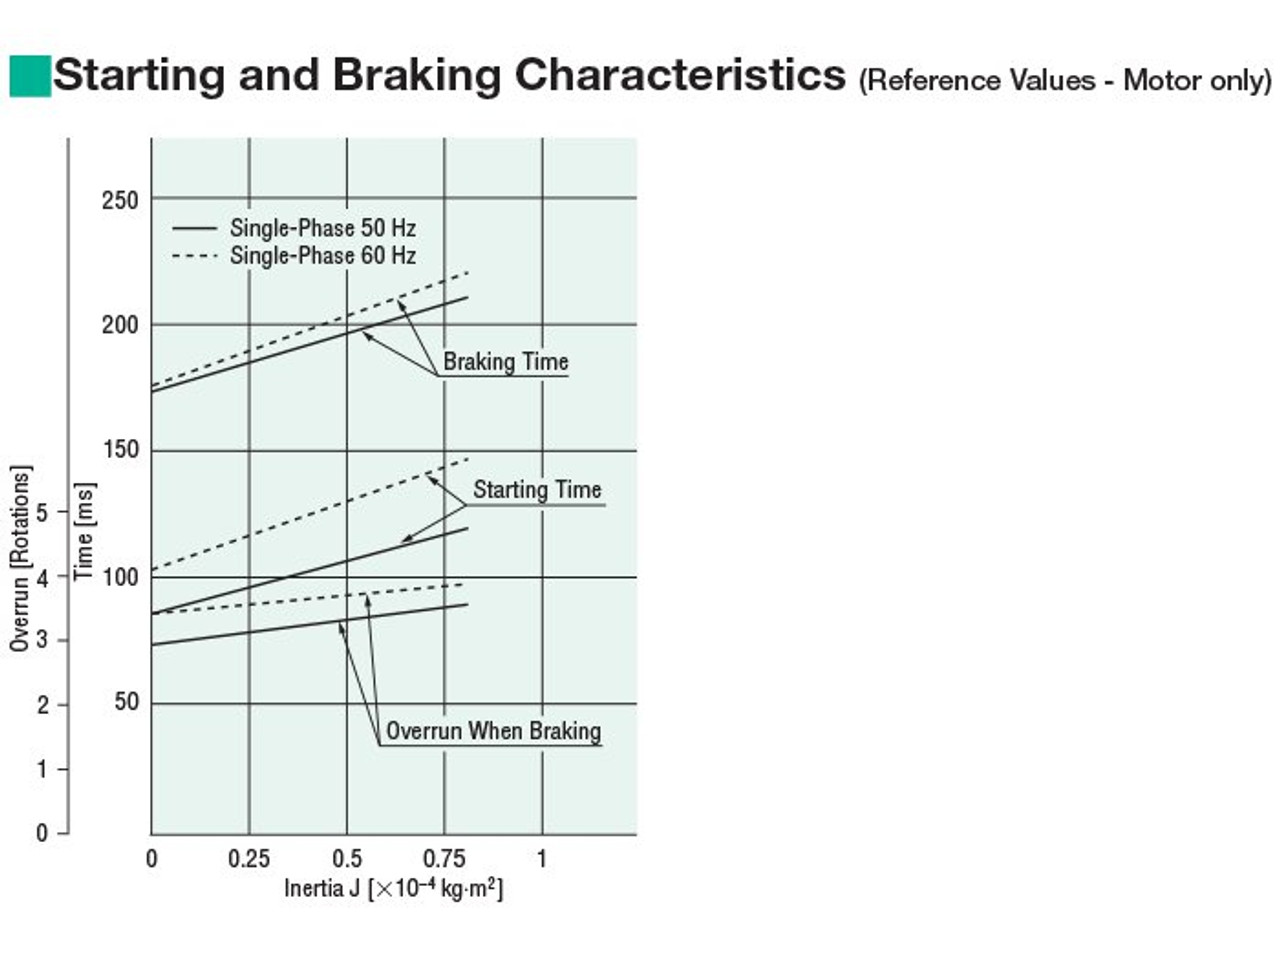 5RK40UAMT2-5 - Brake Specifications